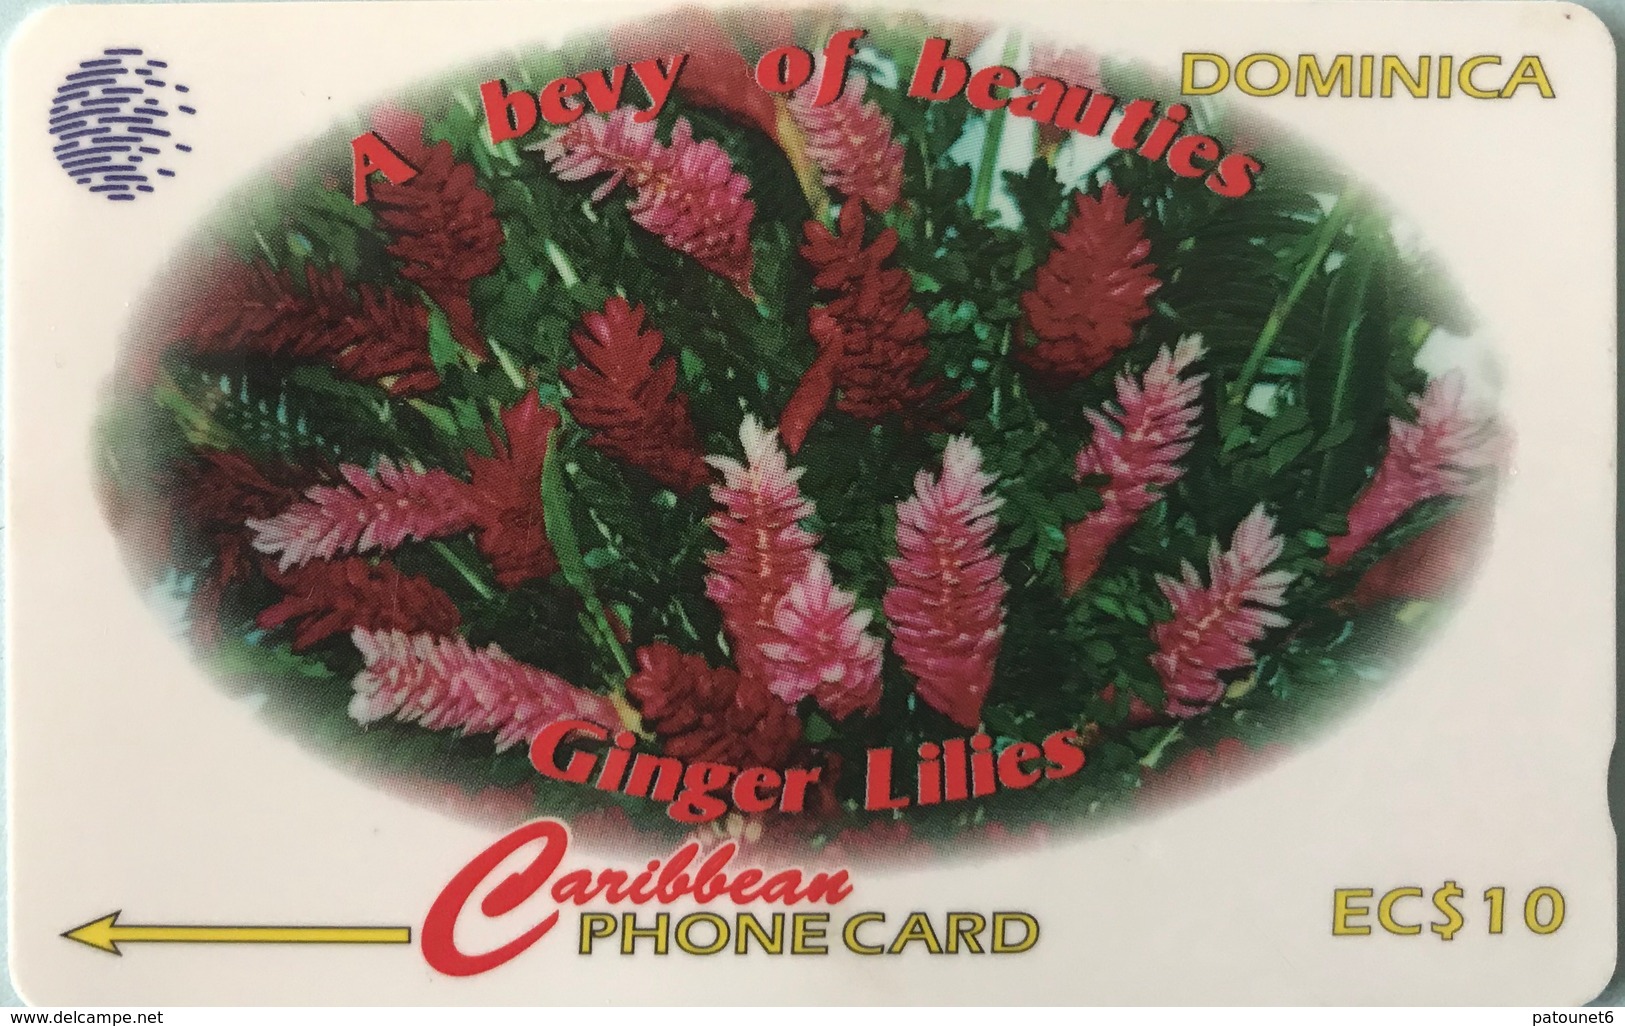 DOMINIQUE - Phonecard  - Cable § Wireless  - Ginger Lilies  -  EC $ 10 - Dominique